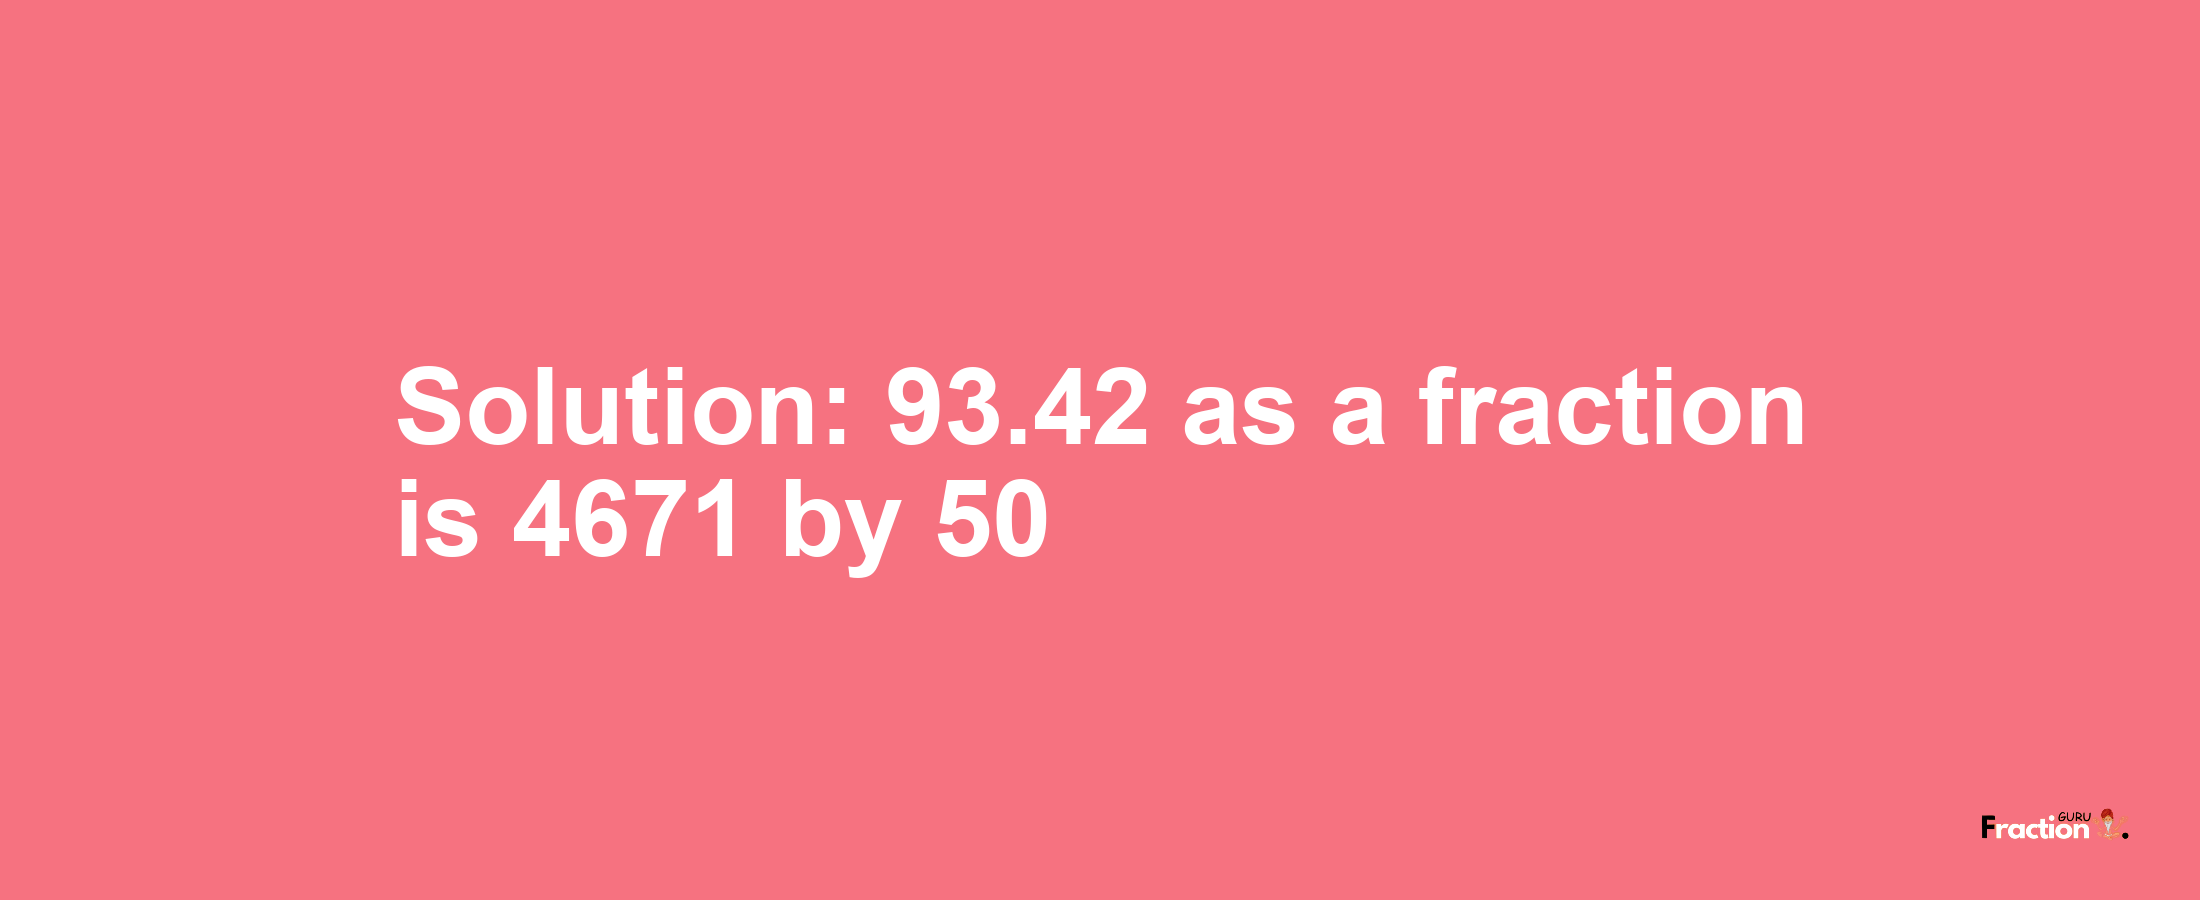 Solution:93.42 as a fraction is 4671/50